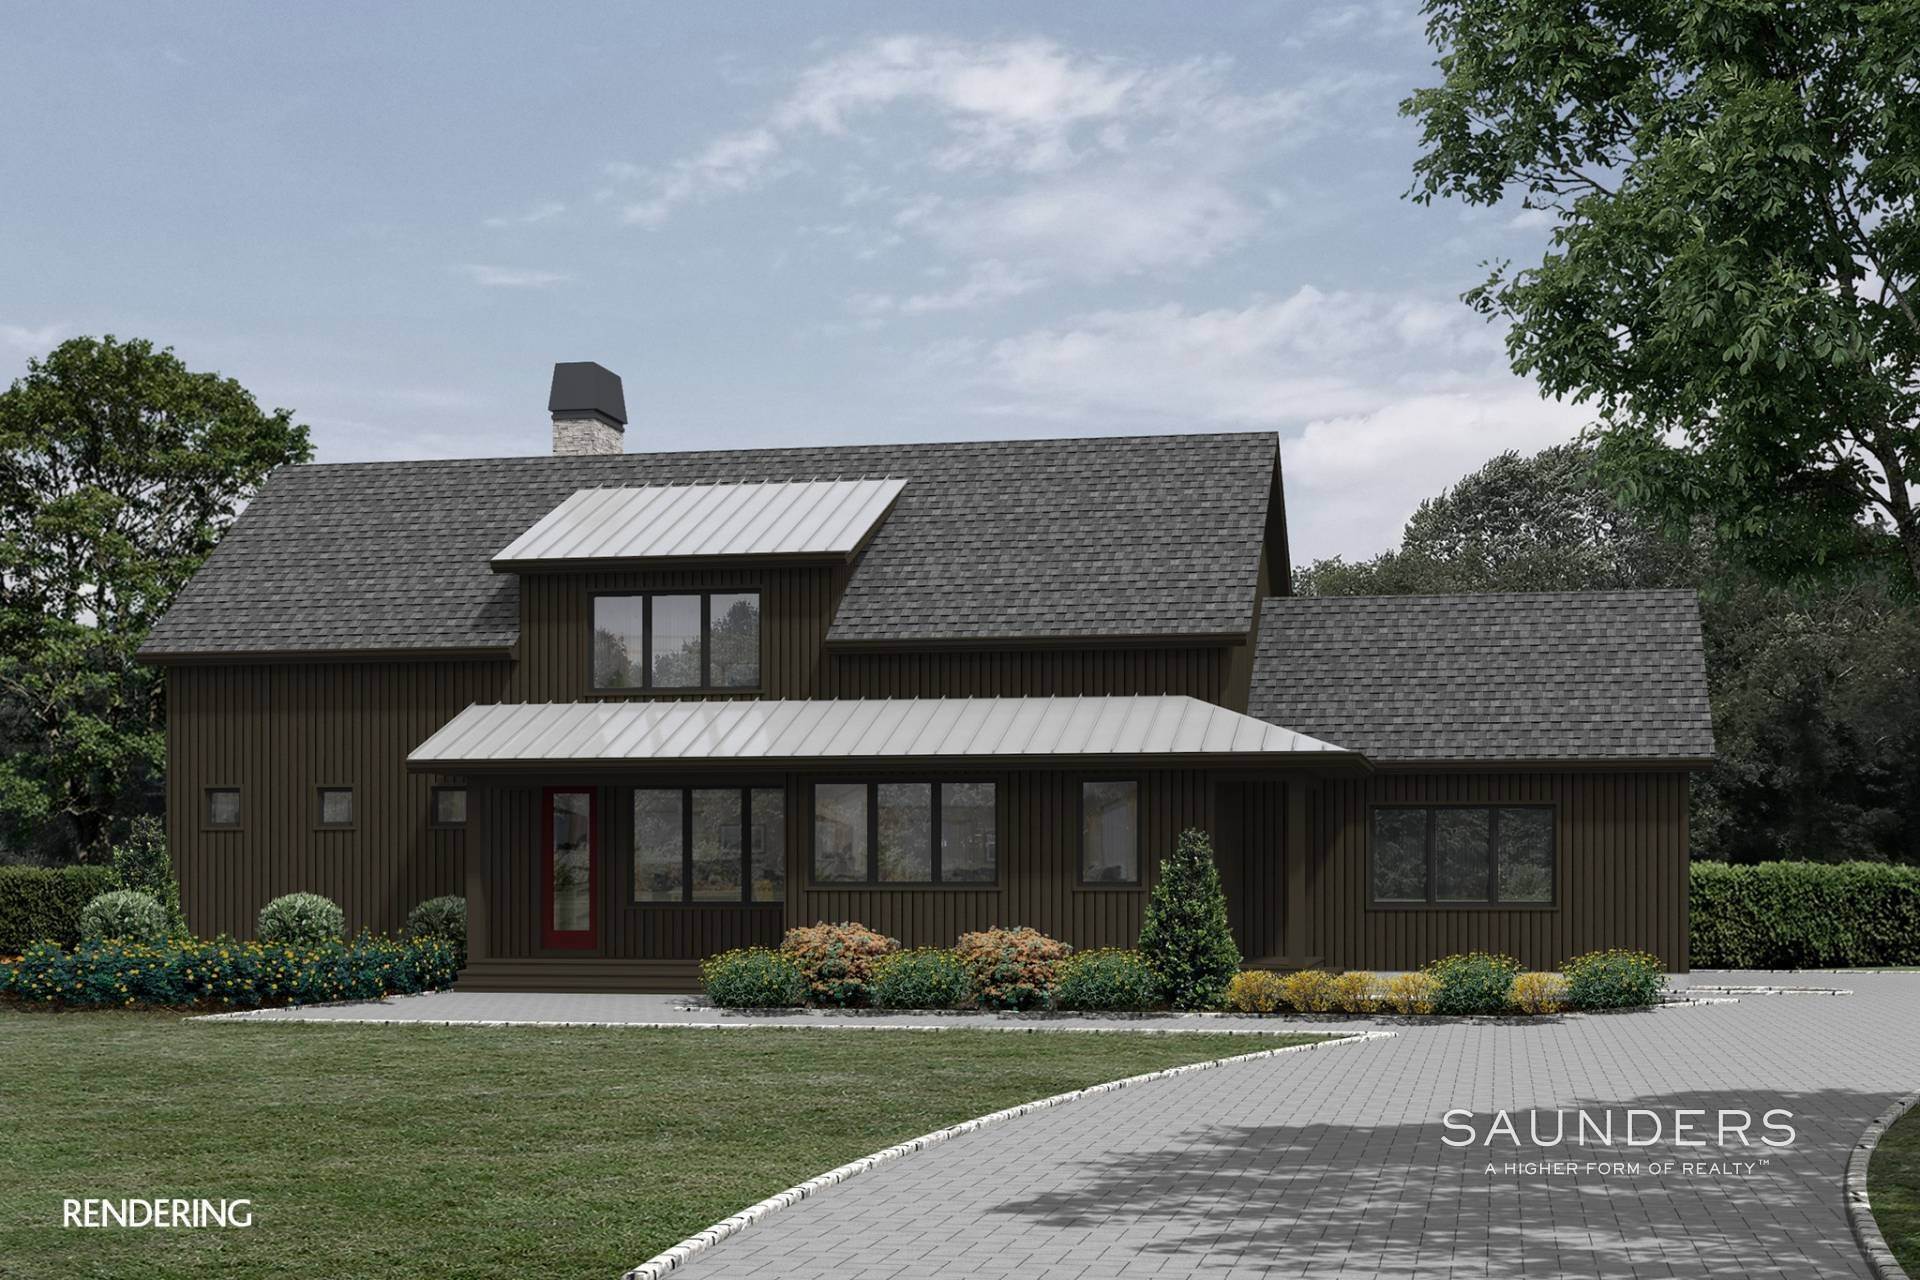 Single Family Homes for Sale at New Construction In Springs Ready In January 2023 56 Glade Road, East Hampton, NY 11937